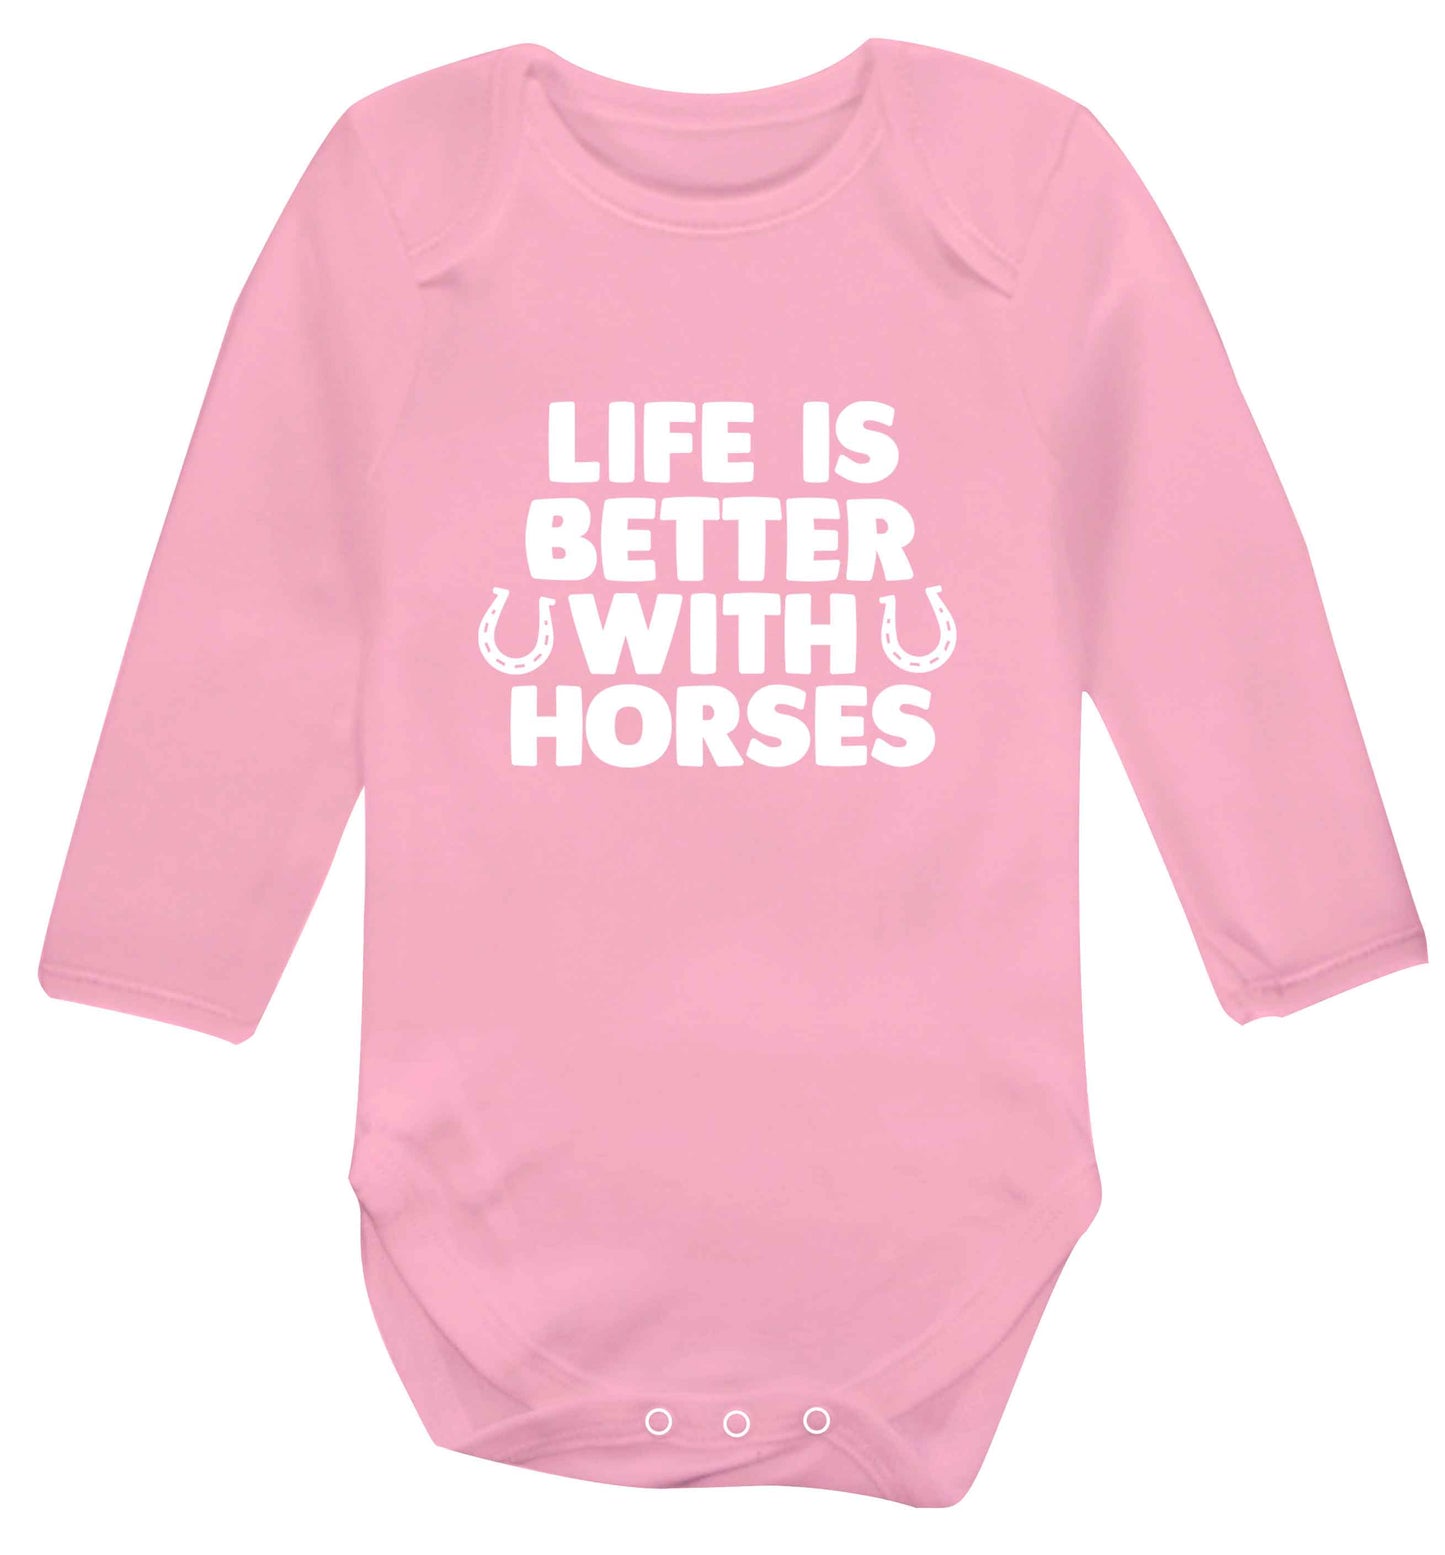 Life is better with horses baby vest long sleeved pale pink 6-12 months